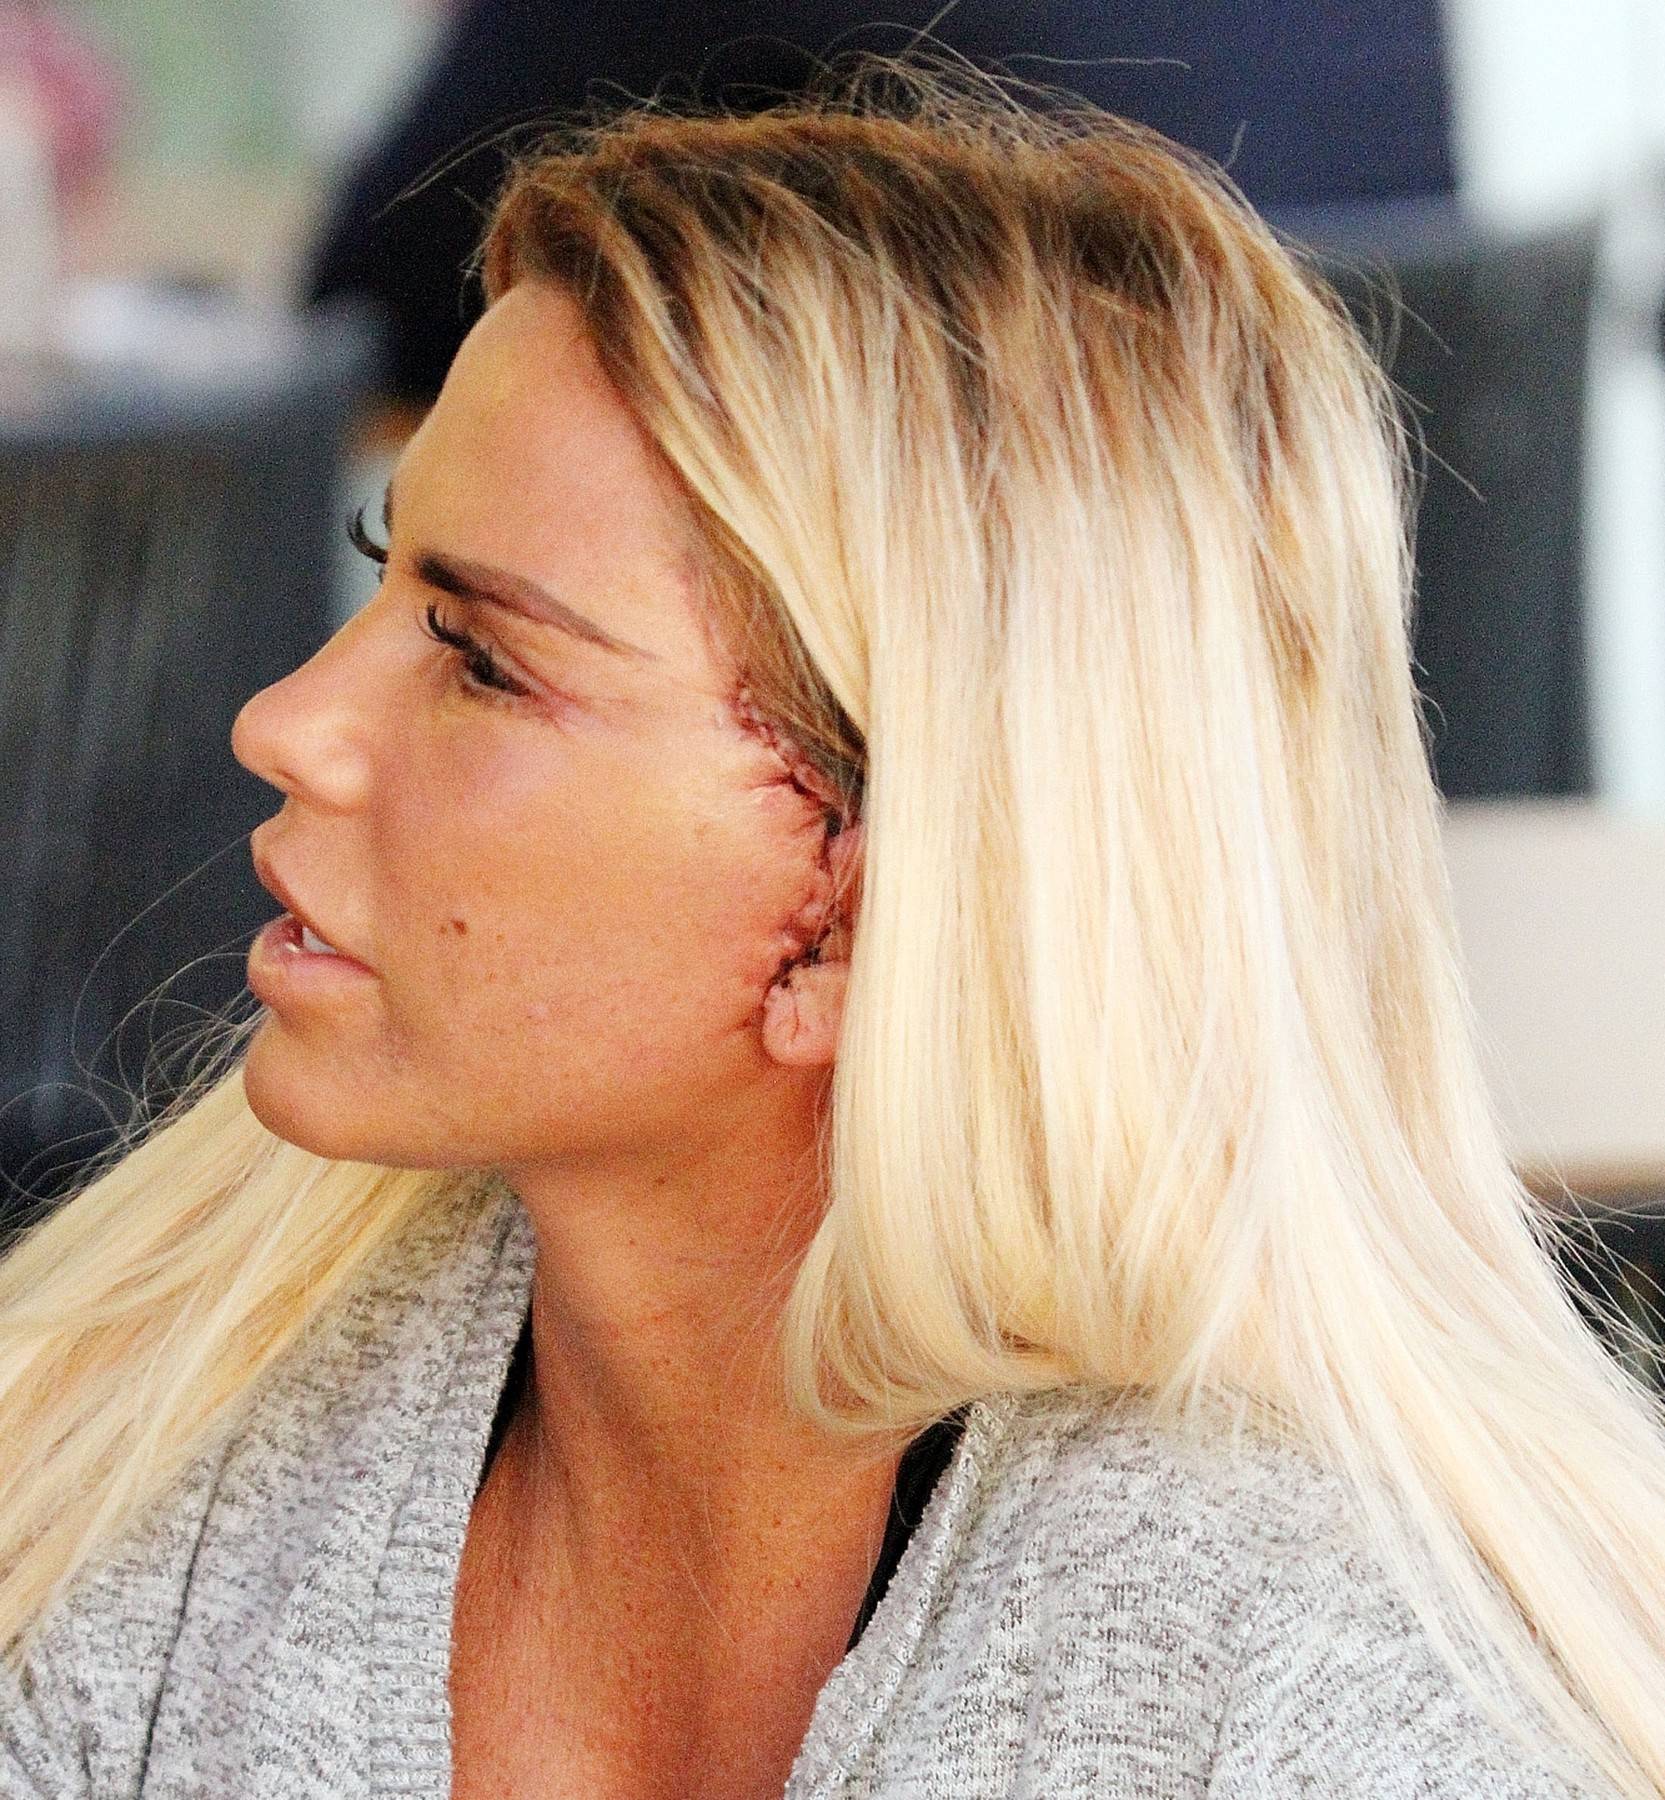 *PREMIUM-EXCLUSIVE* MUST CALL FOR PRICING BEFORE USAGE  - The British Glamour Model Katie Price aka Jordan is in recovery mode showing the scars from the results of her facial procedure out in Turkey